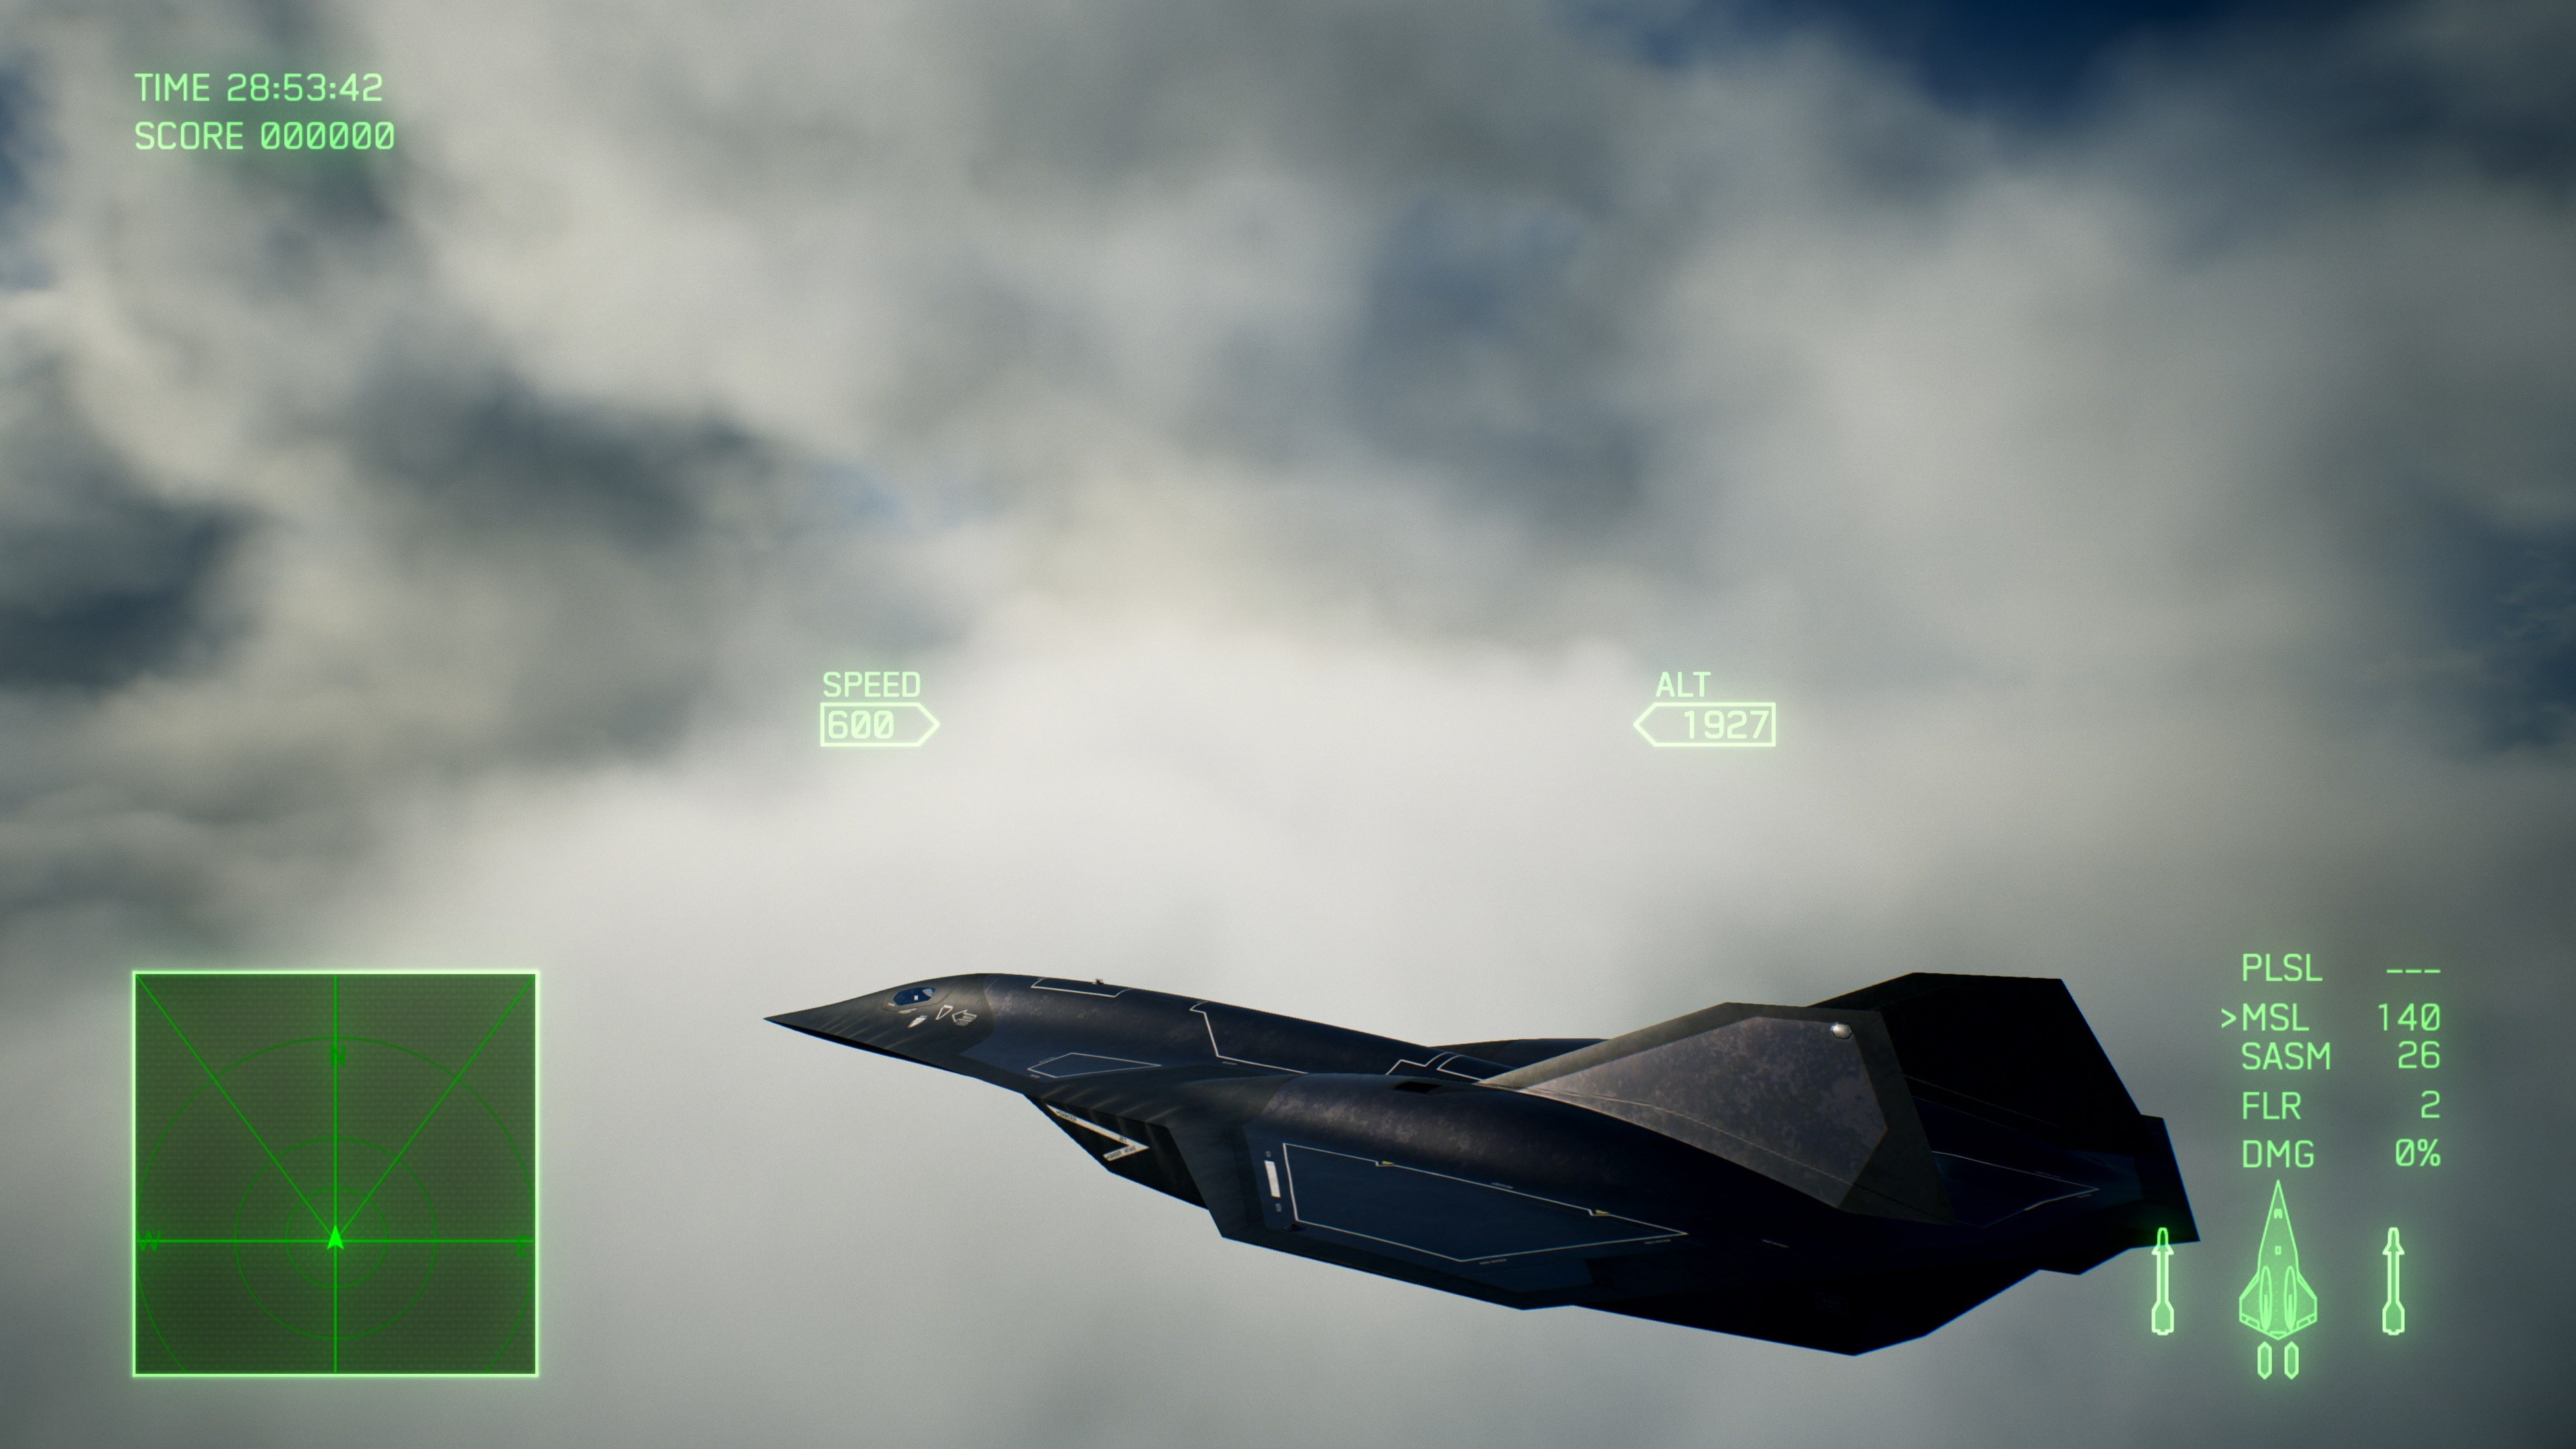 ACE COMBAT 7: SKIES UNKNOWN - TOP GUN: Maverick Ultimate Edition US XBOX One / Xbox Series X,S CD Key